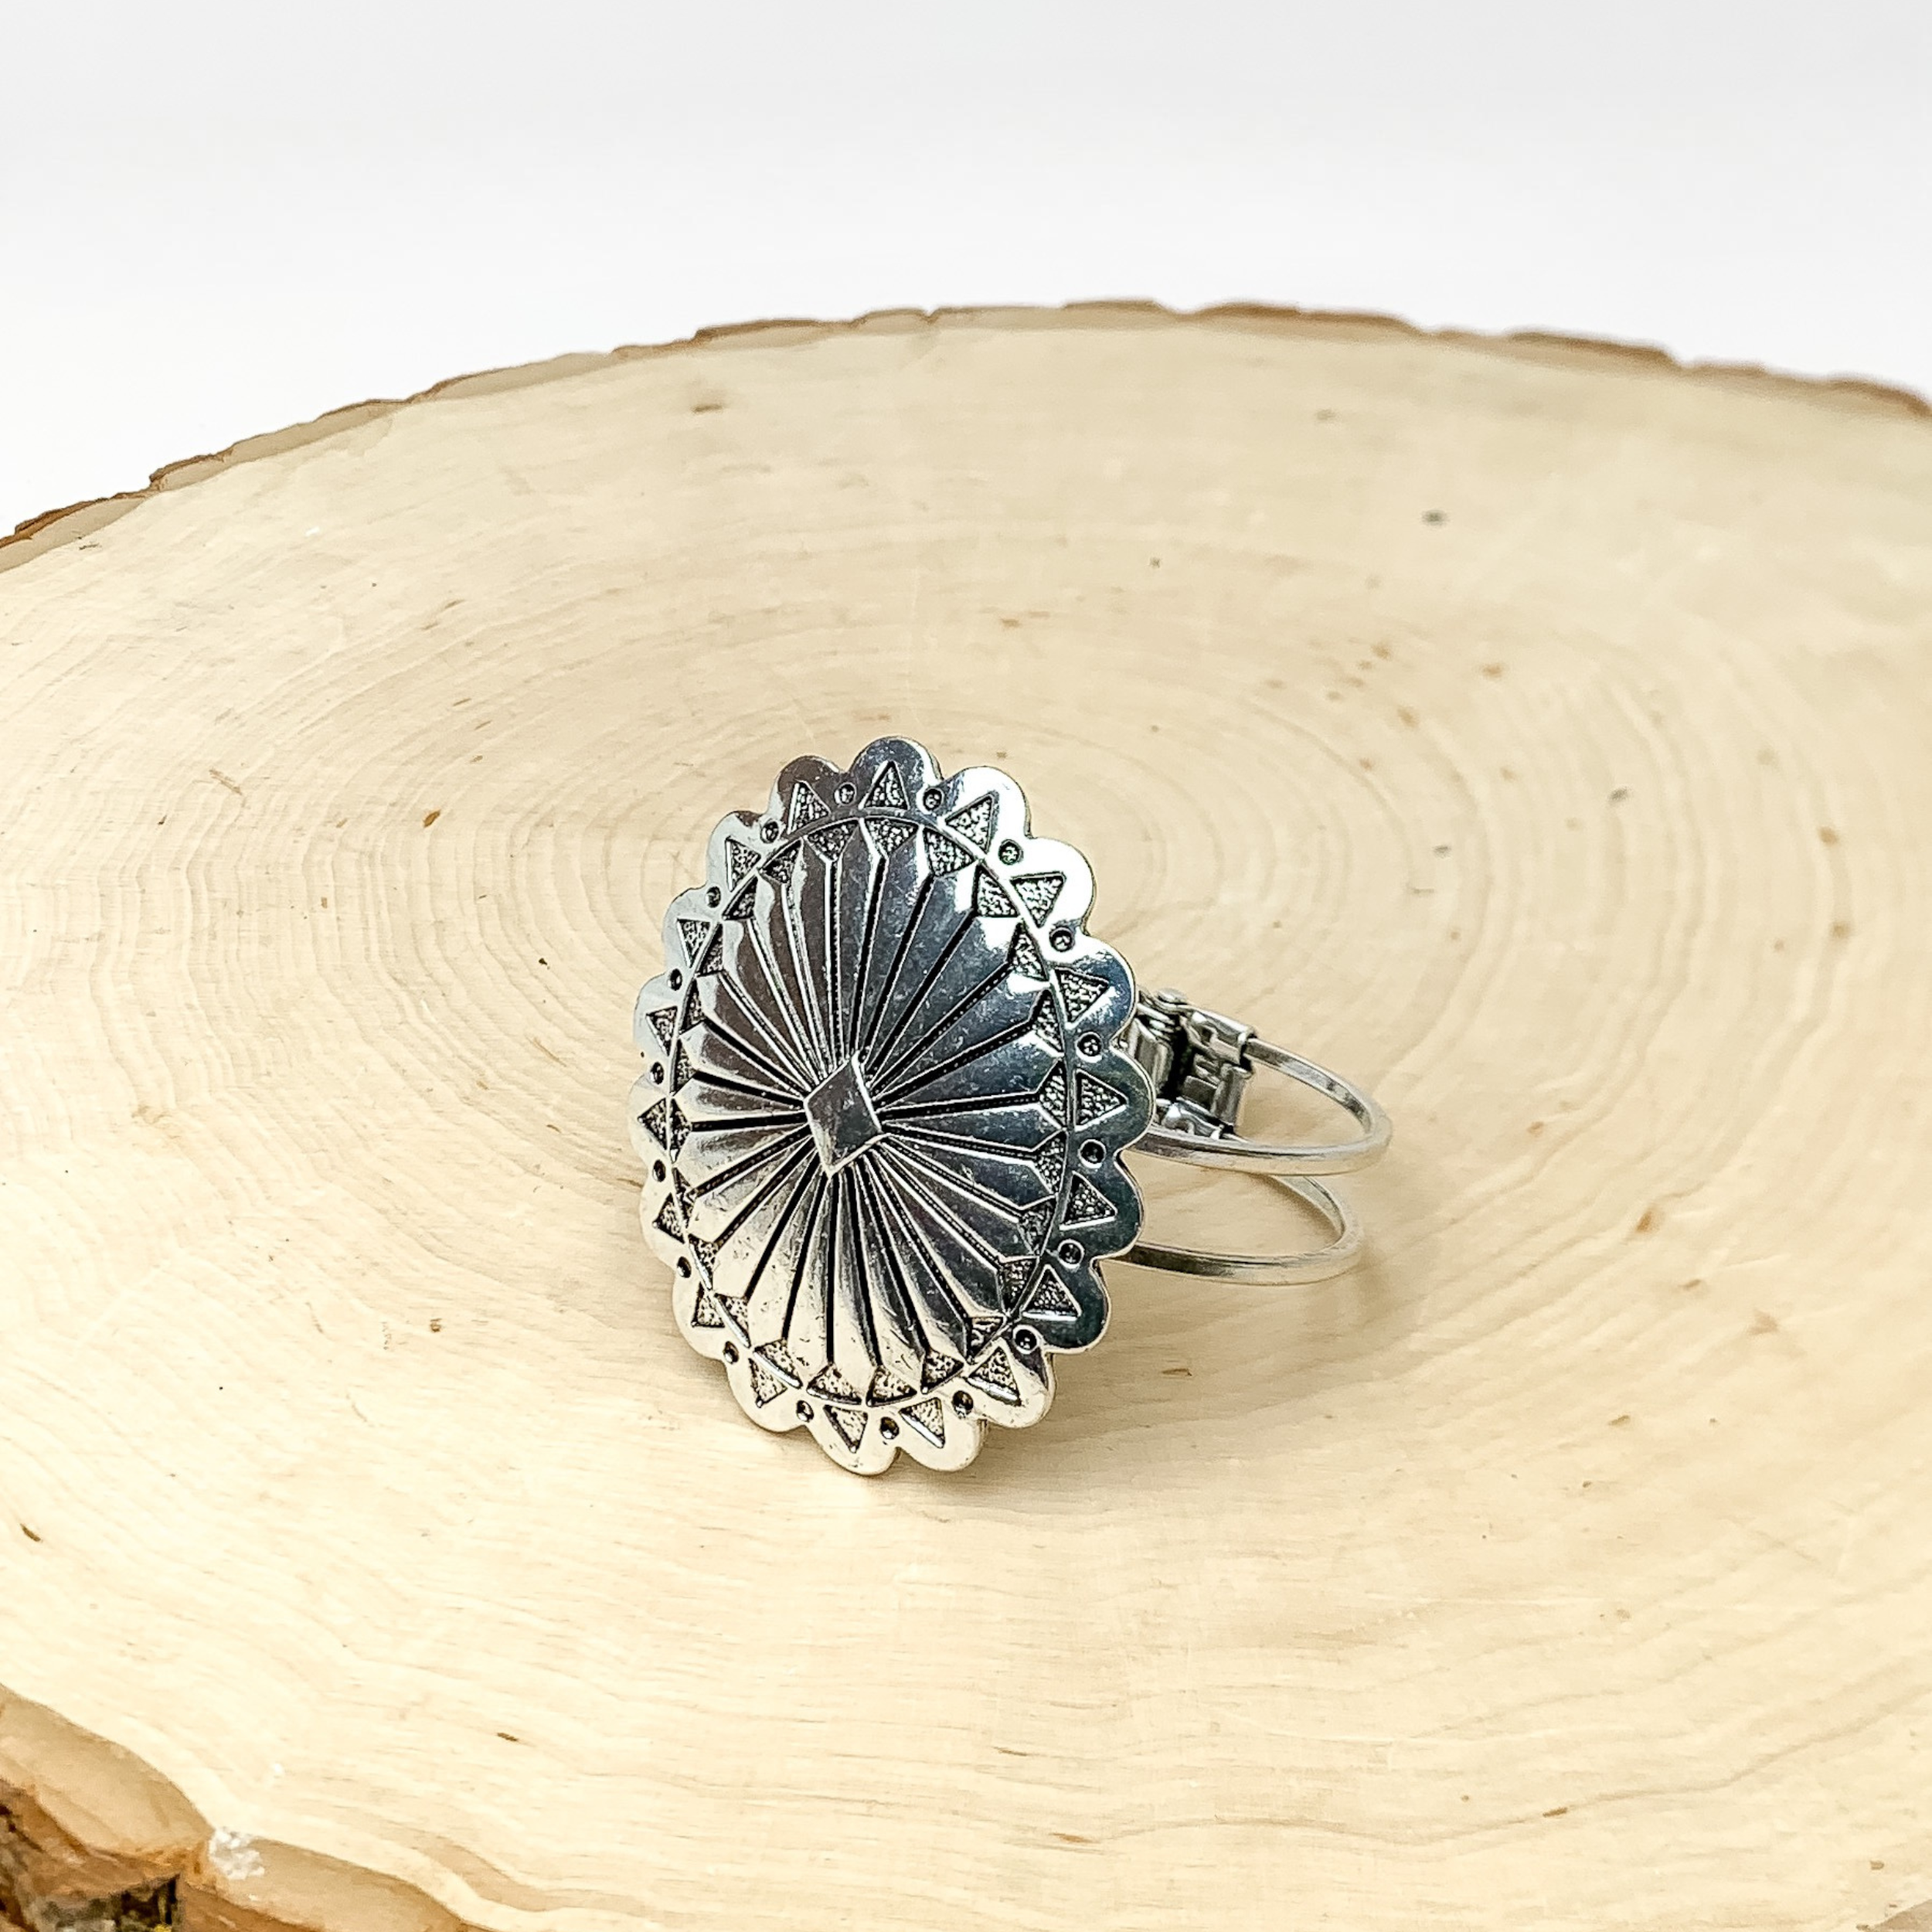 Western Oval Hinge Bracelet in Silver Tone With Turquoise Stone. Pictured sitting on a circular piece of wood. The background of the picture is white.